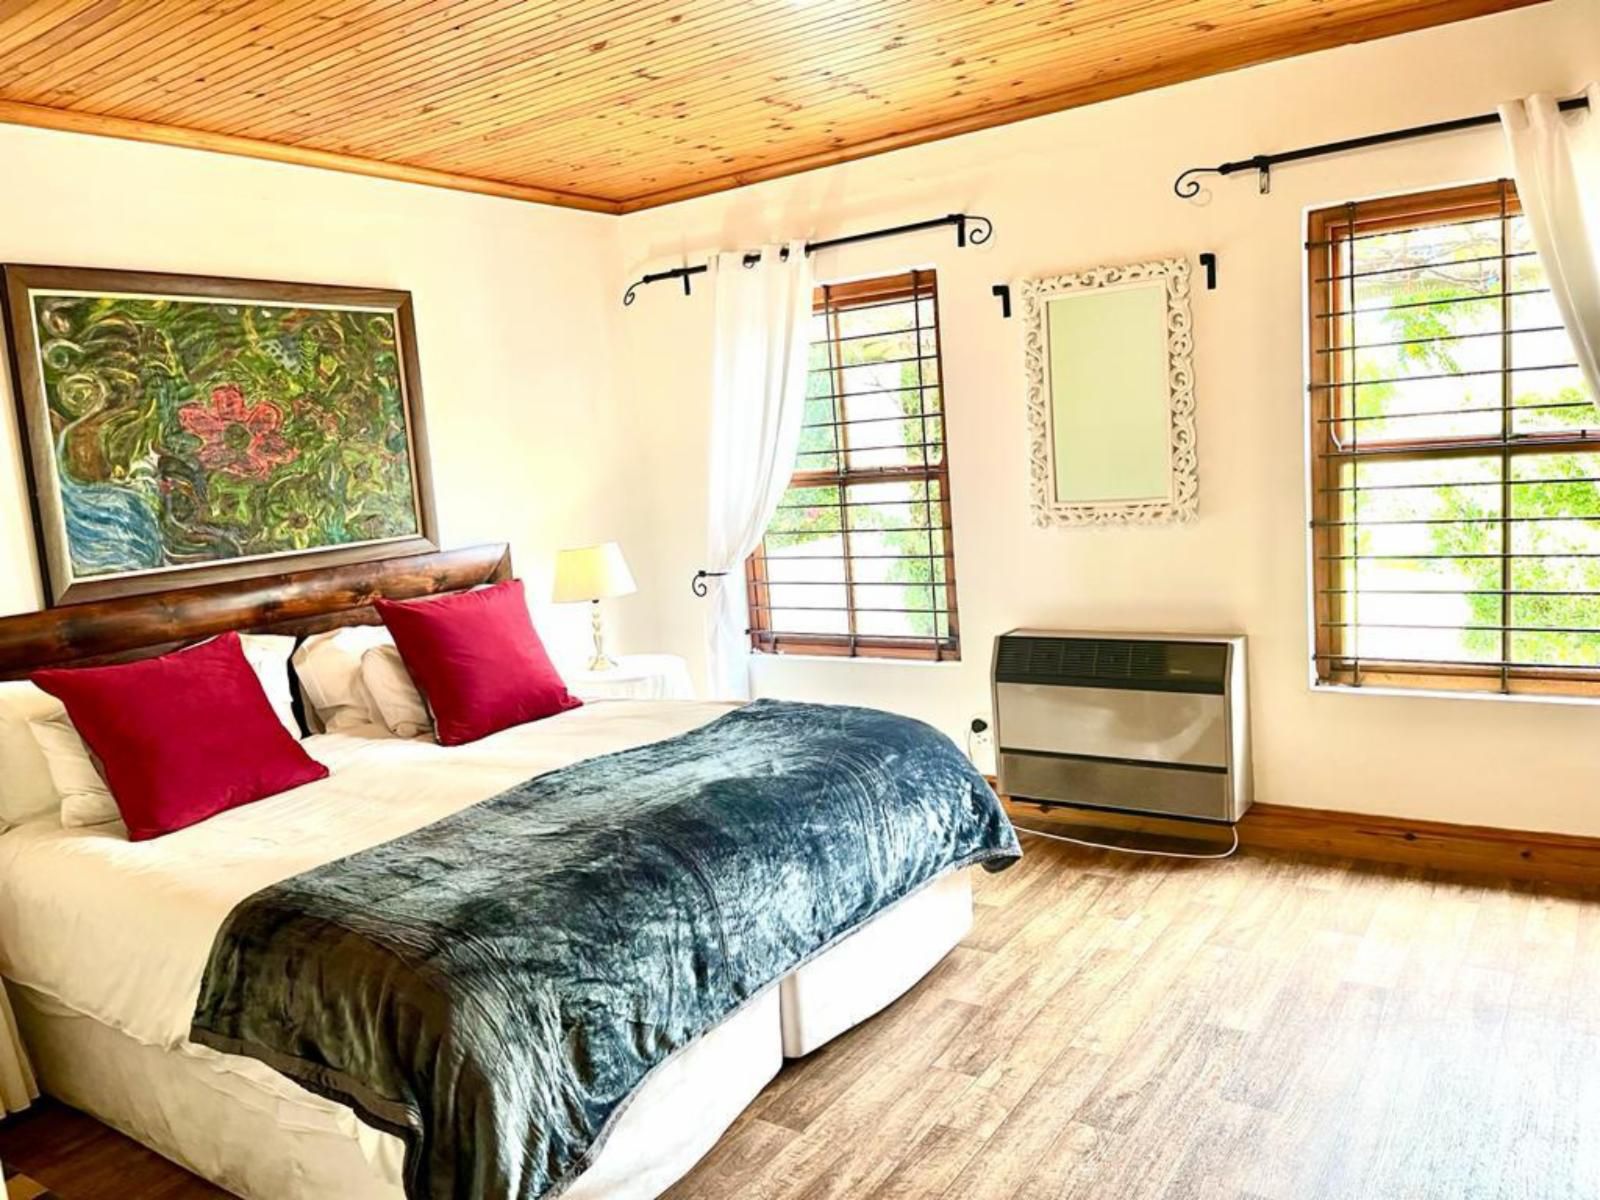 Eikelaan Farm Cottages Tulbagh Western Cape South Africa Bedroom